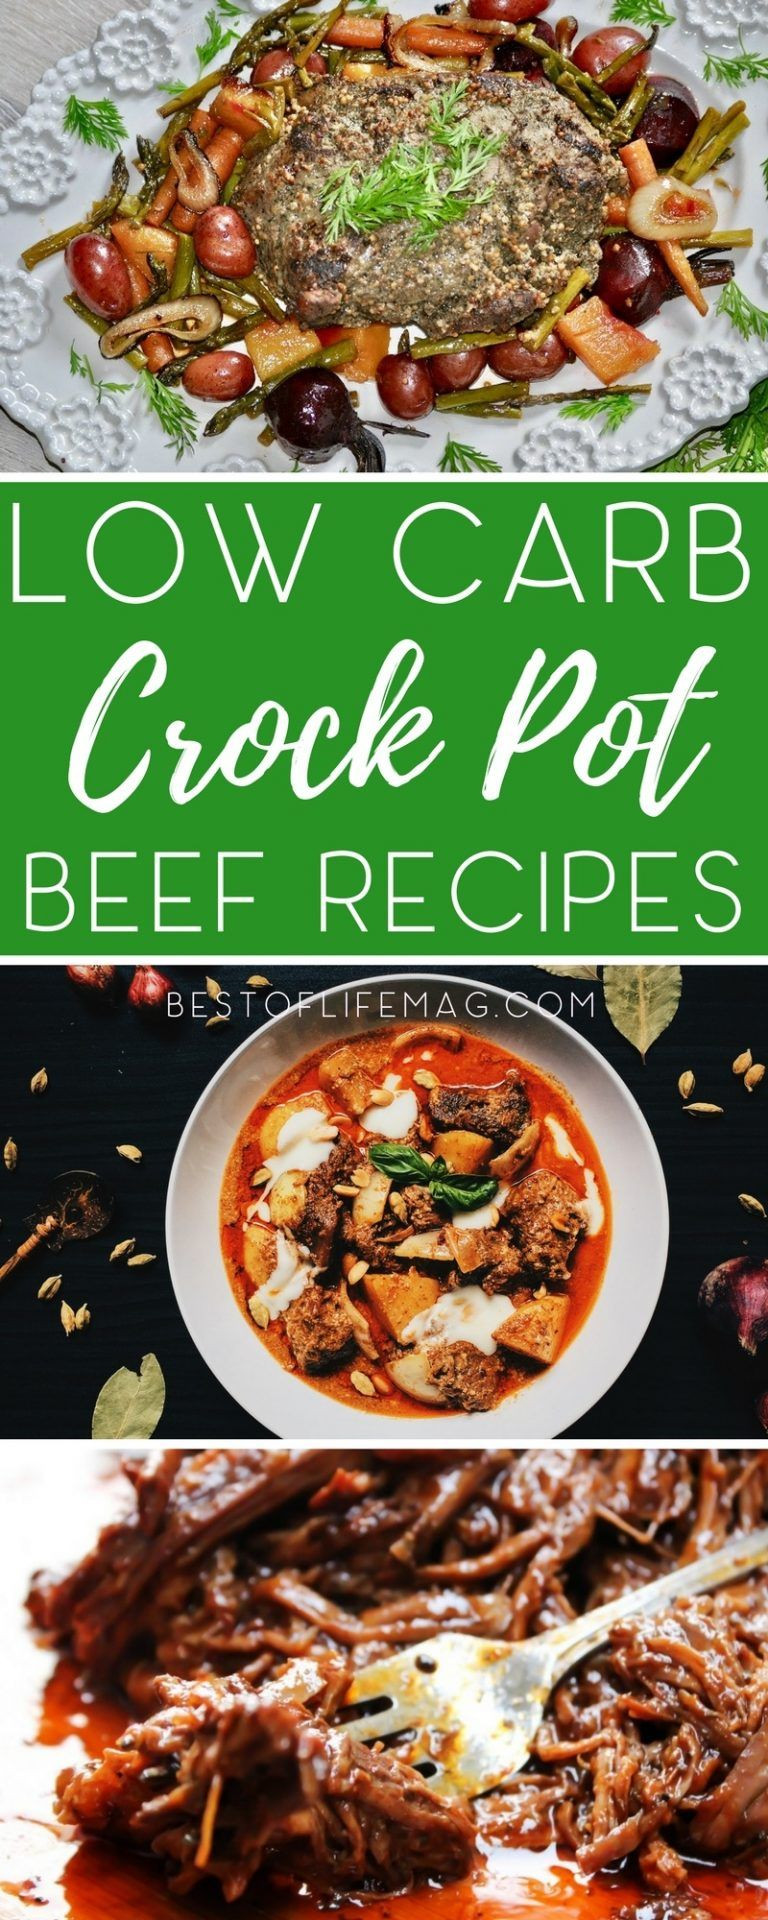 Slow Cooker Keto Recipes Ground Beef
 Ketogenic ground beef Crockpot recipes keep you on track